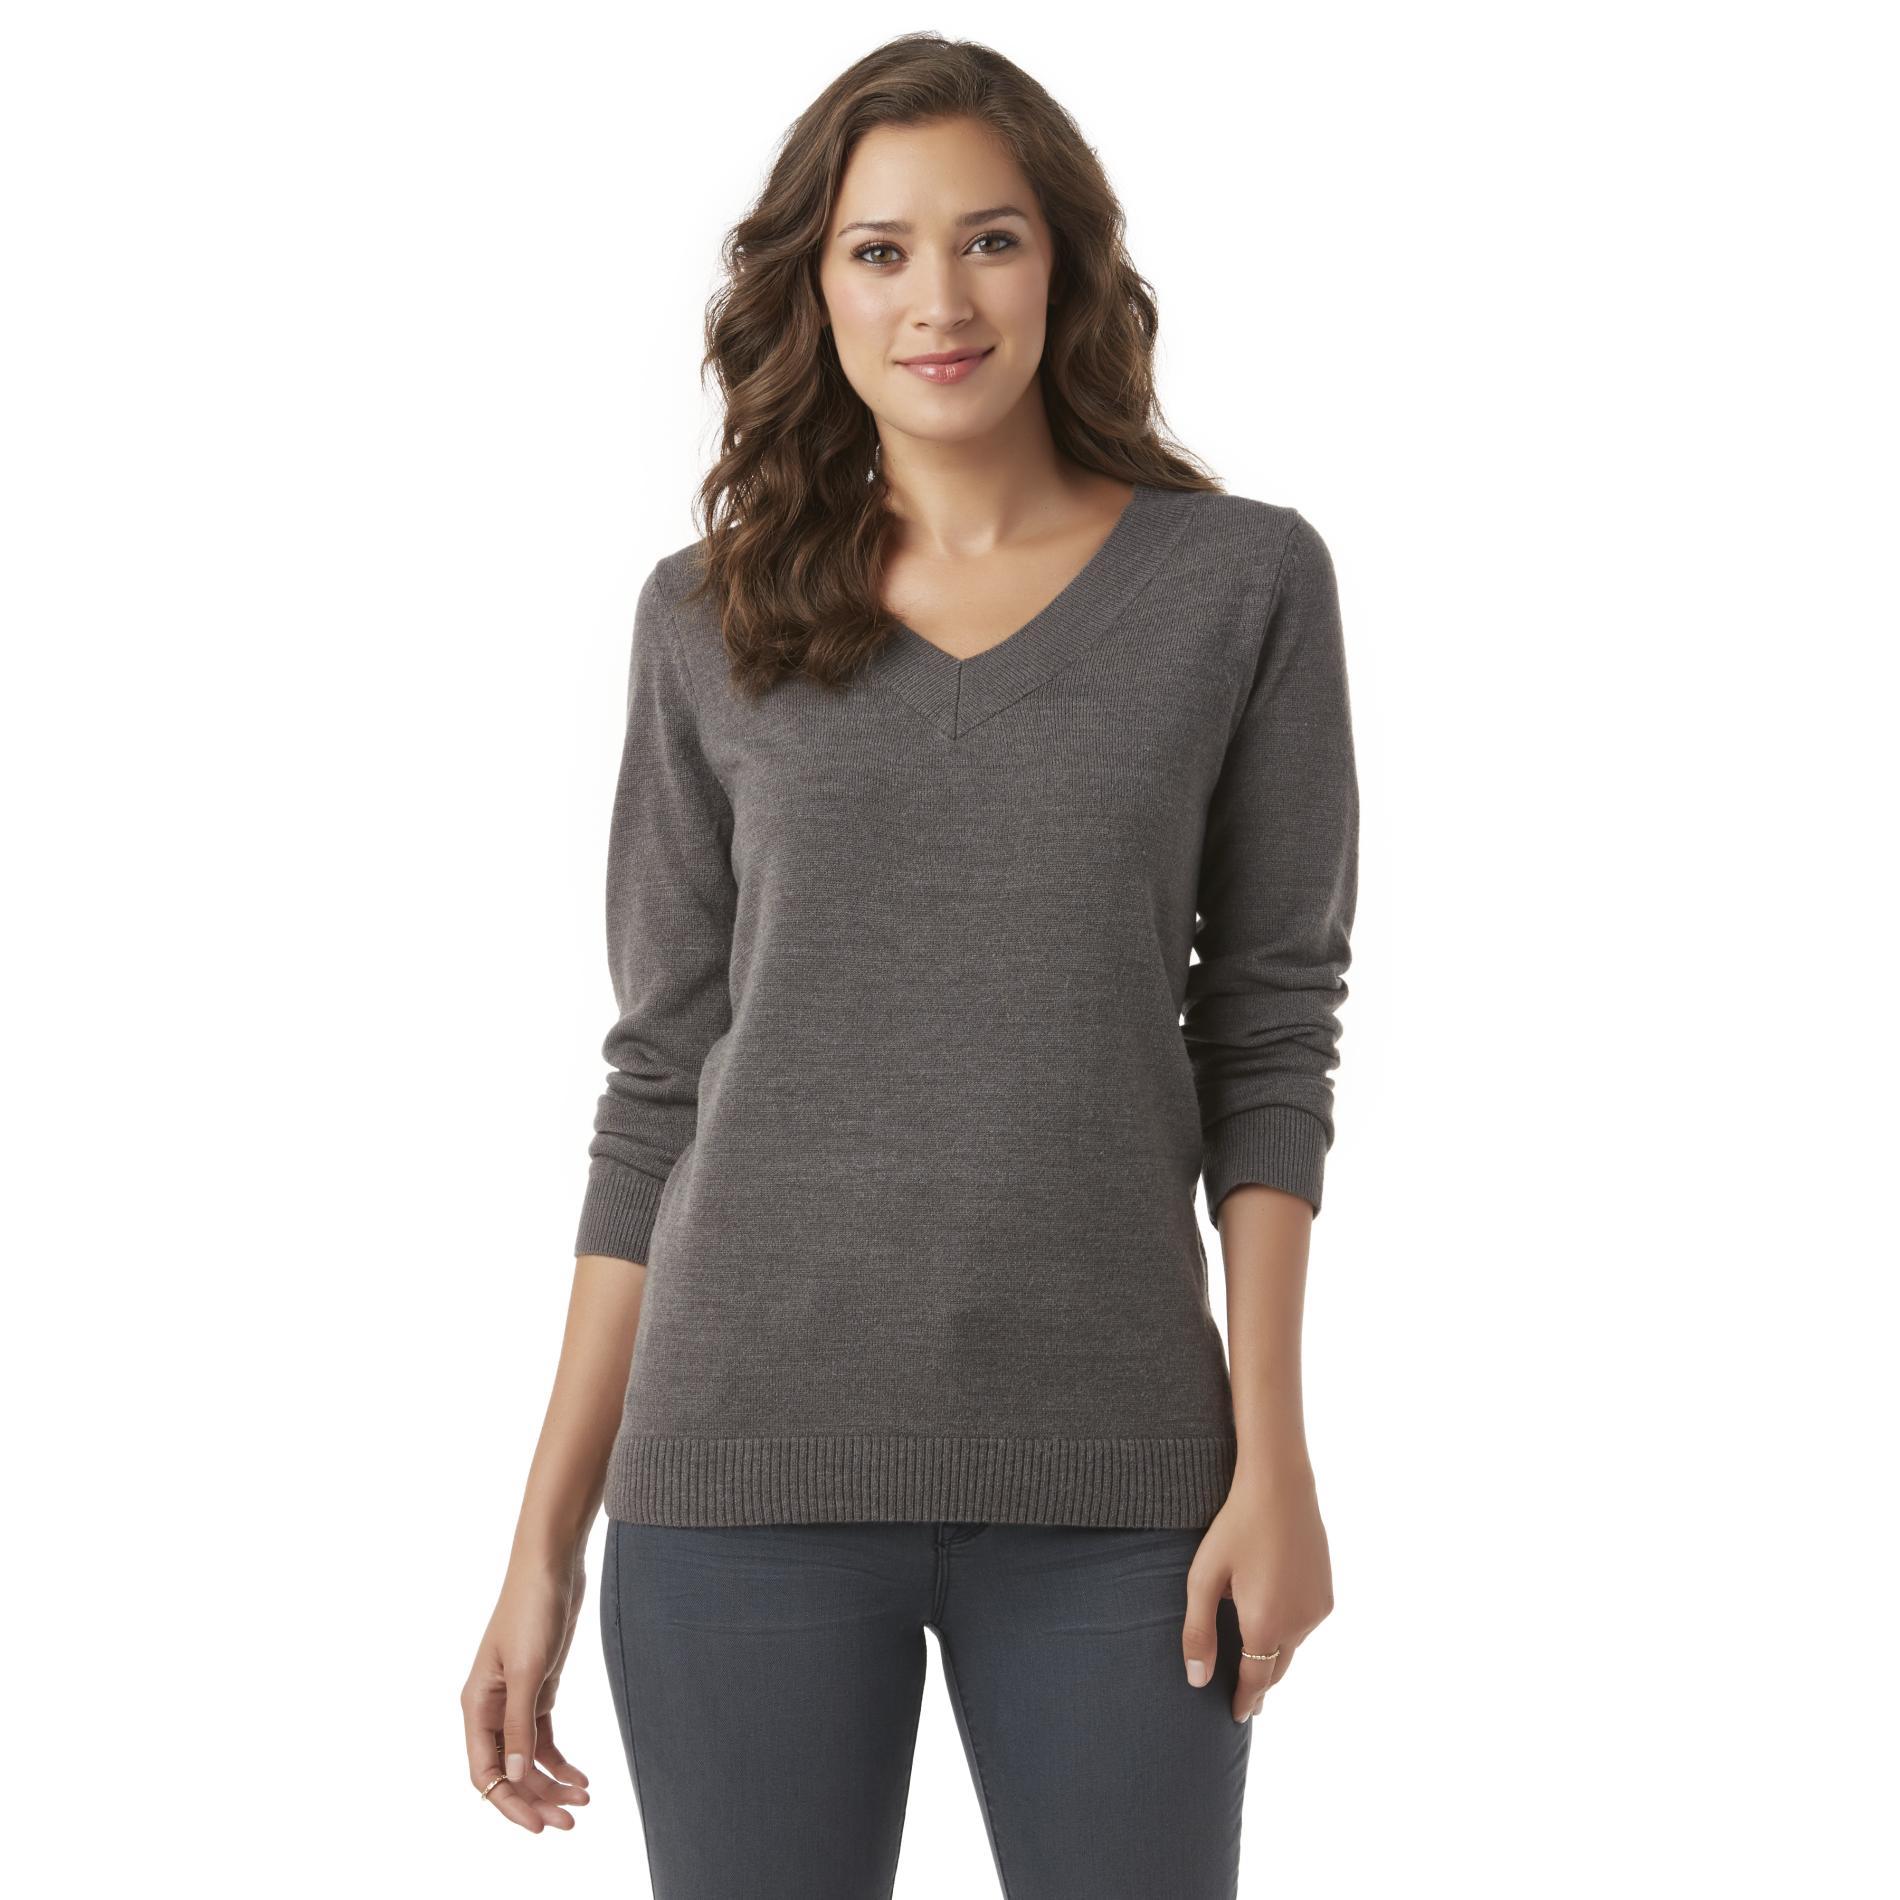 Simply Styled Women's V-Neck Sweater